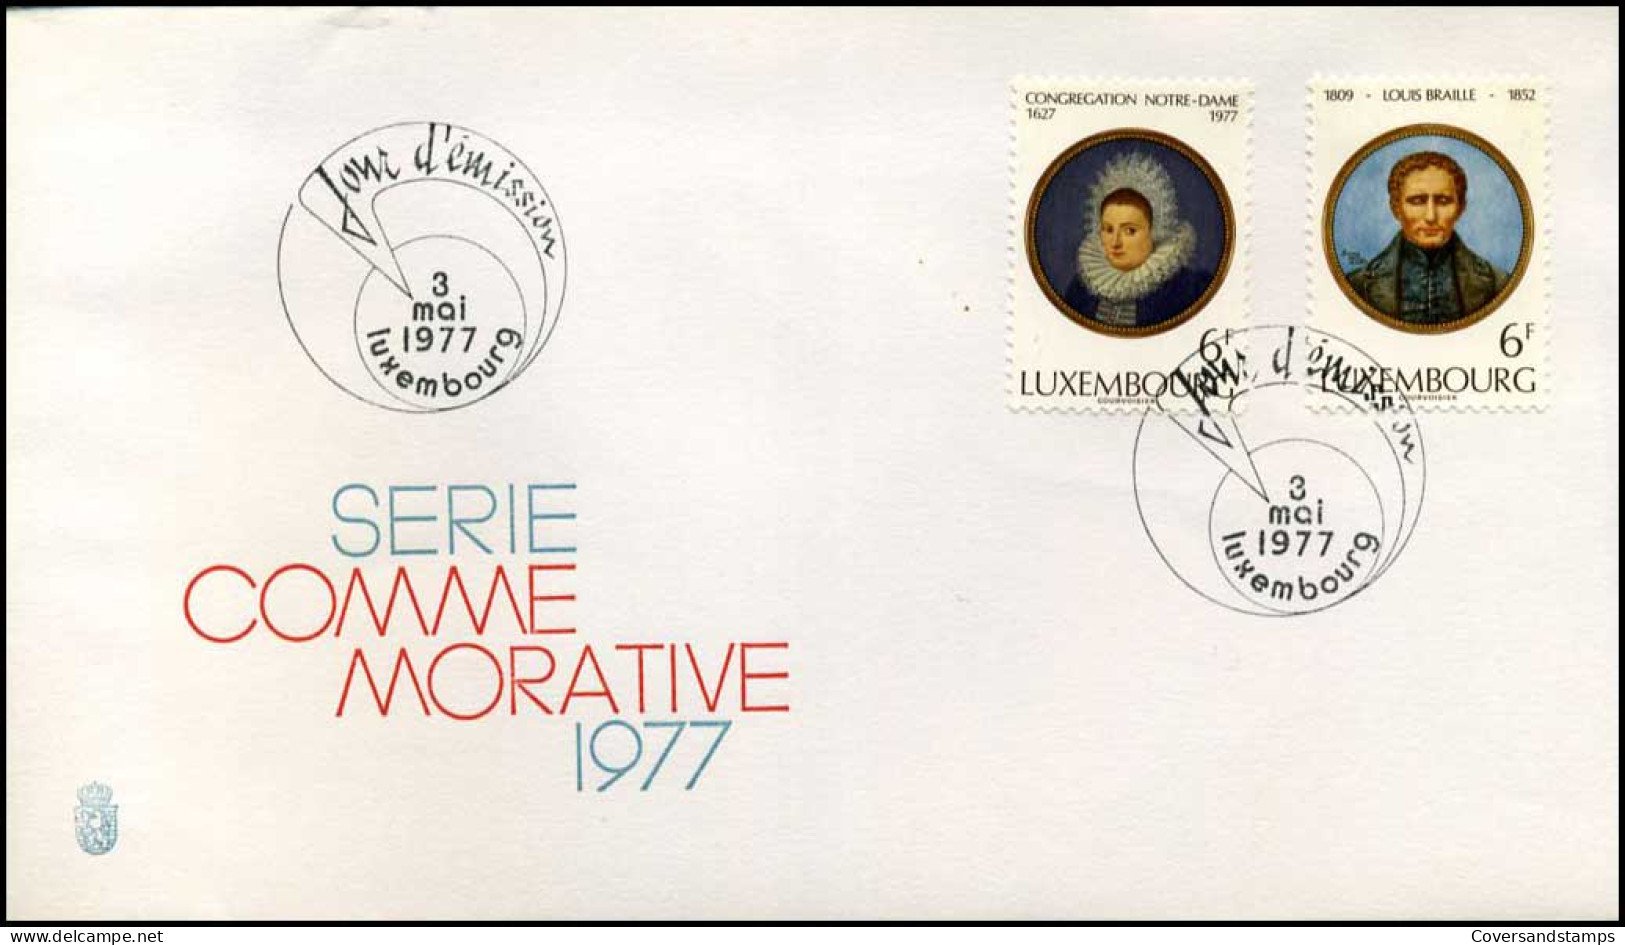 Luxembourg - FDC - Louis Braille - Congregation Notre-Dame - FDC